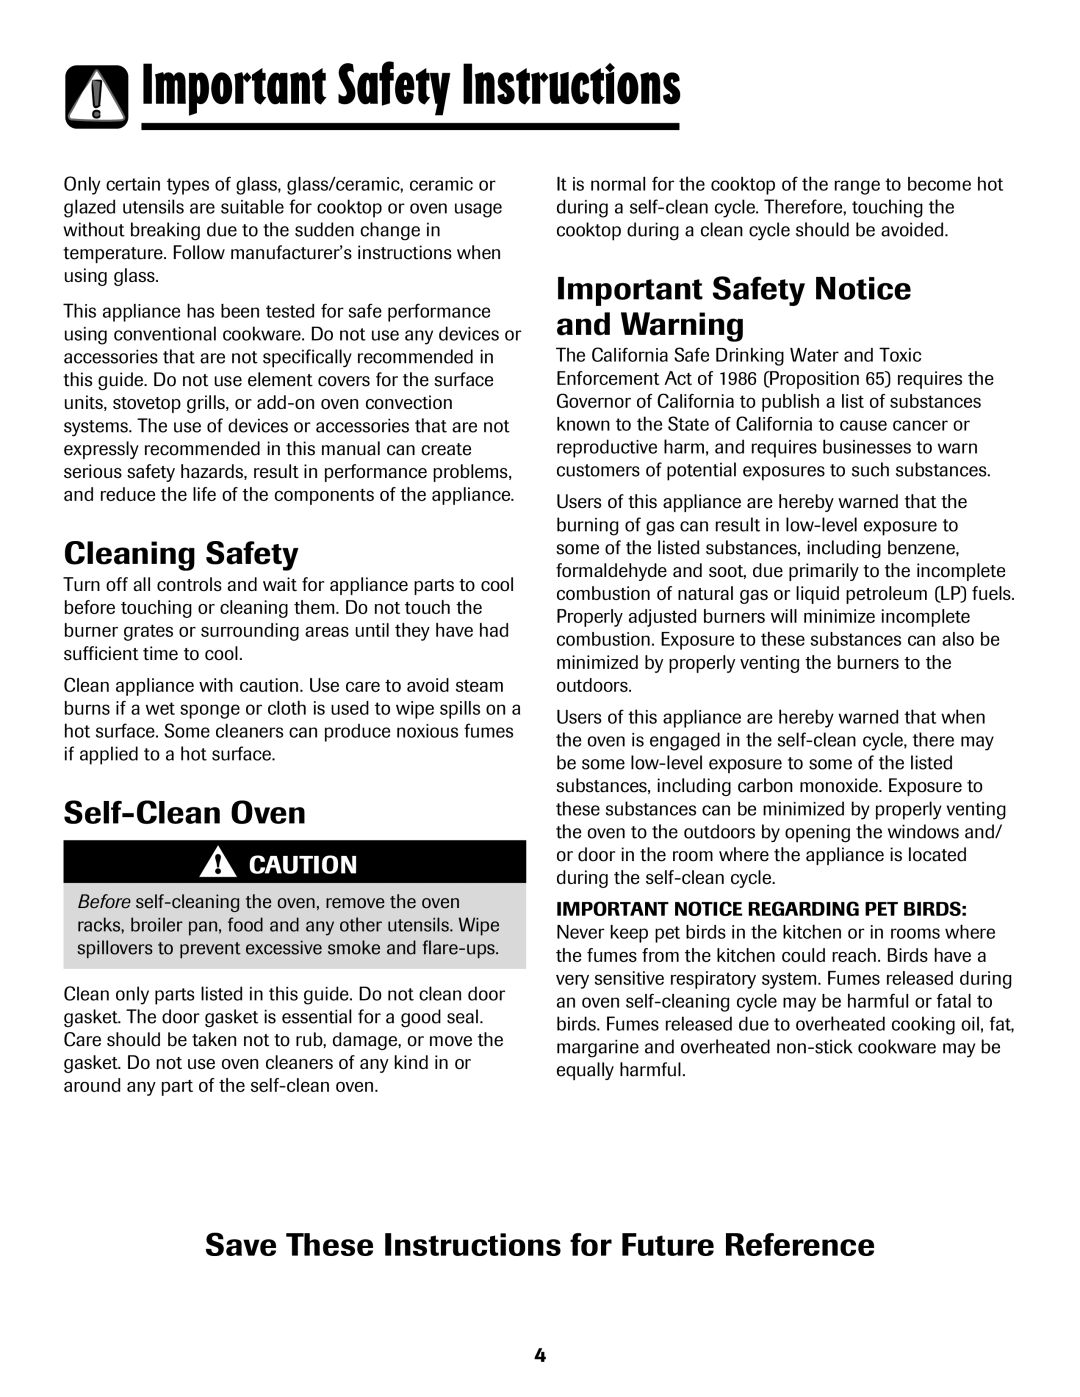 Maytag Gas - Precision Touch Control 500 Range Cleaning Safety, Self-Clean Oven, Important Safety Notice and Warning 